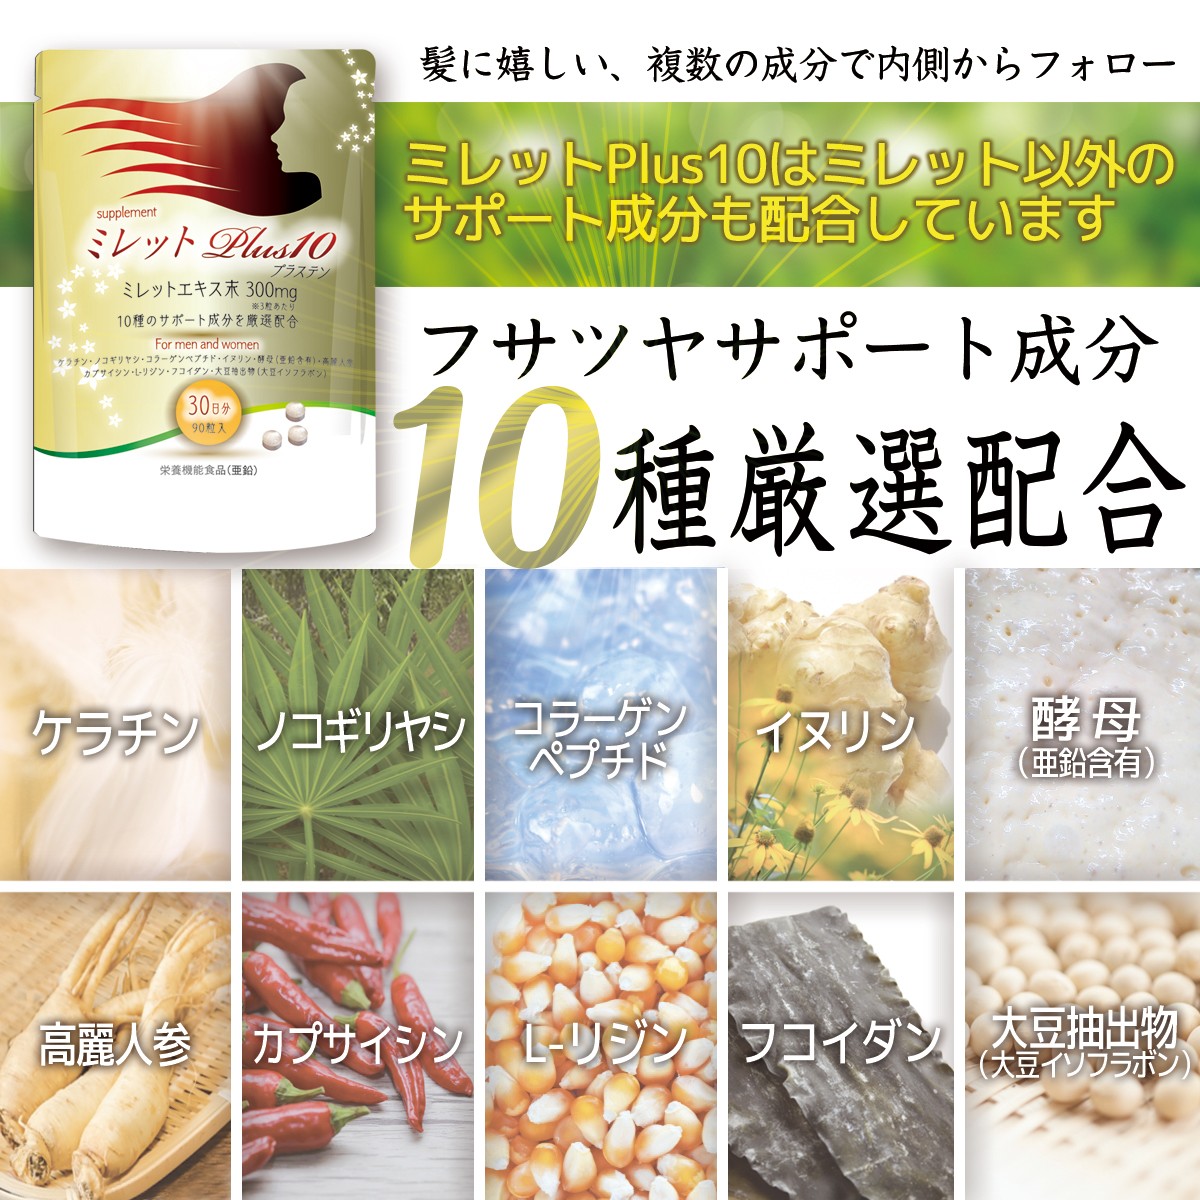 mi let Plus10 Serenoa collagen fucoidan etc. carefuly selected 10 kind addition combination supplement 30 day minute made in Japan 